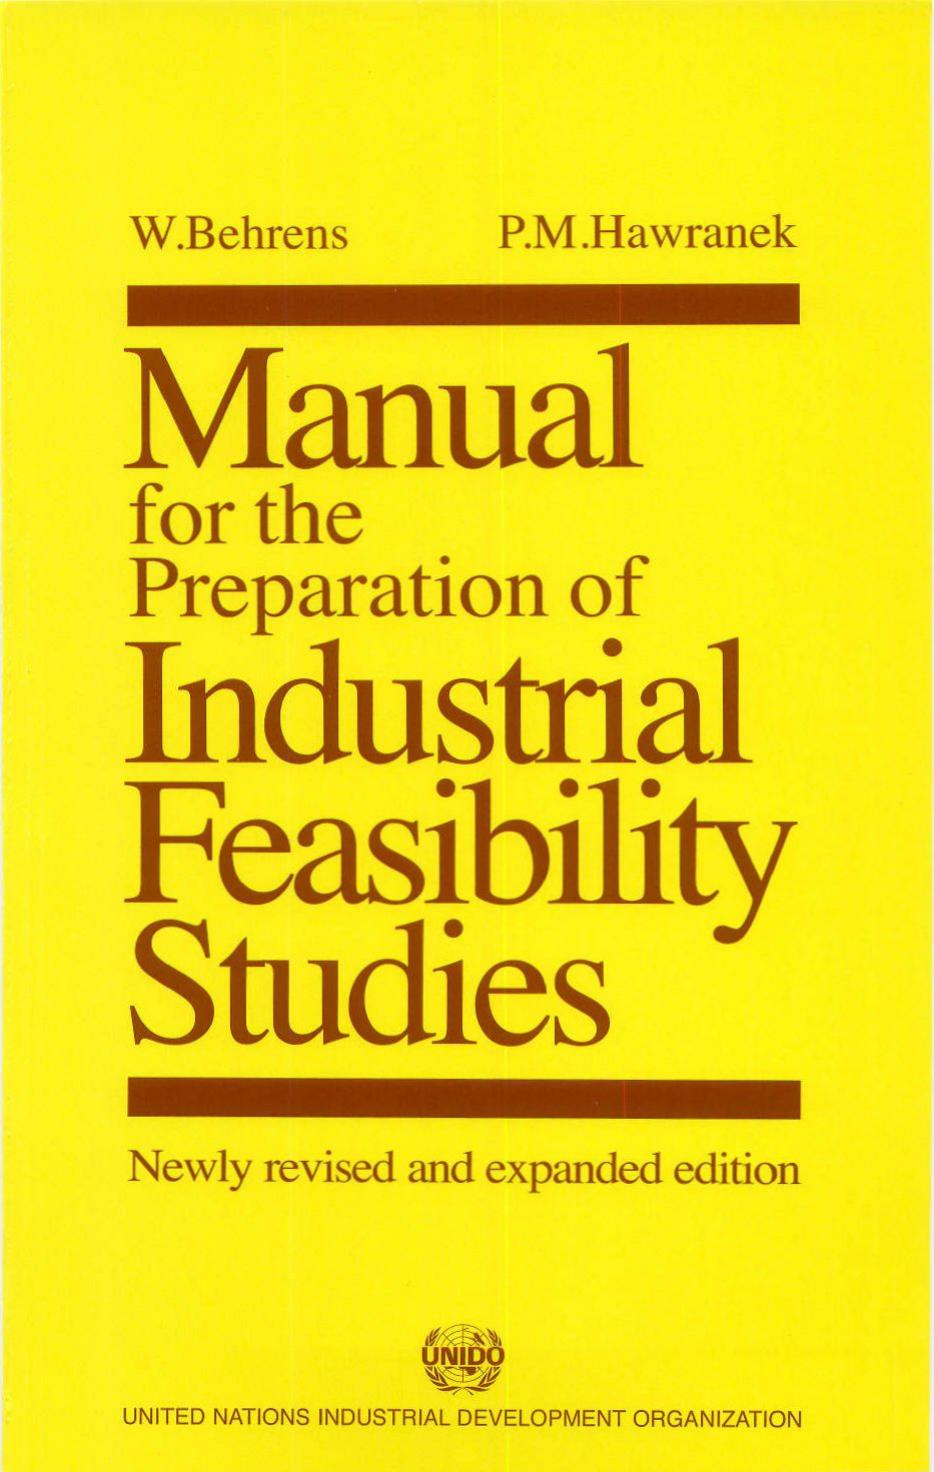 MANUAL FOR THE PREPARATION OF INDUSTRIAL  FEASIBILITY STUDIES